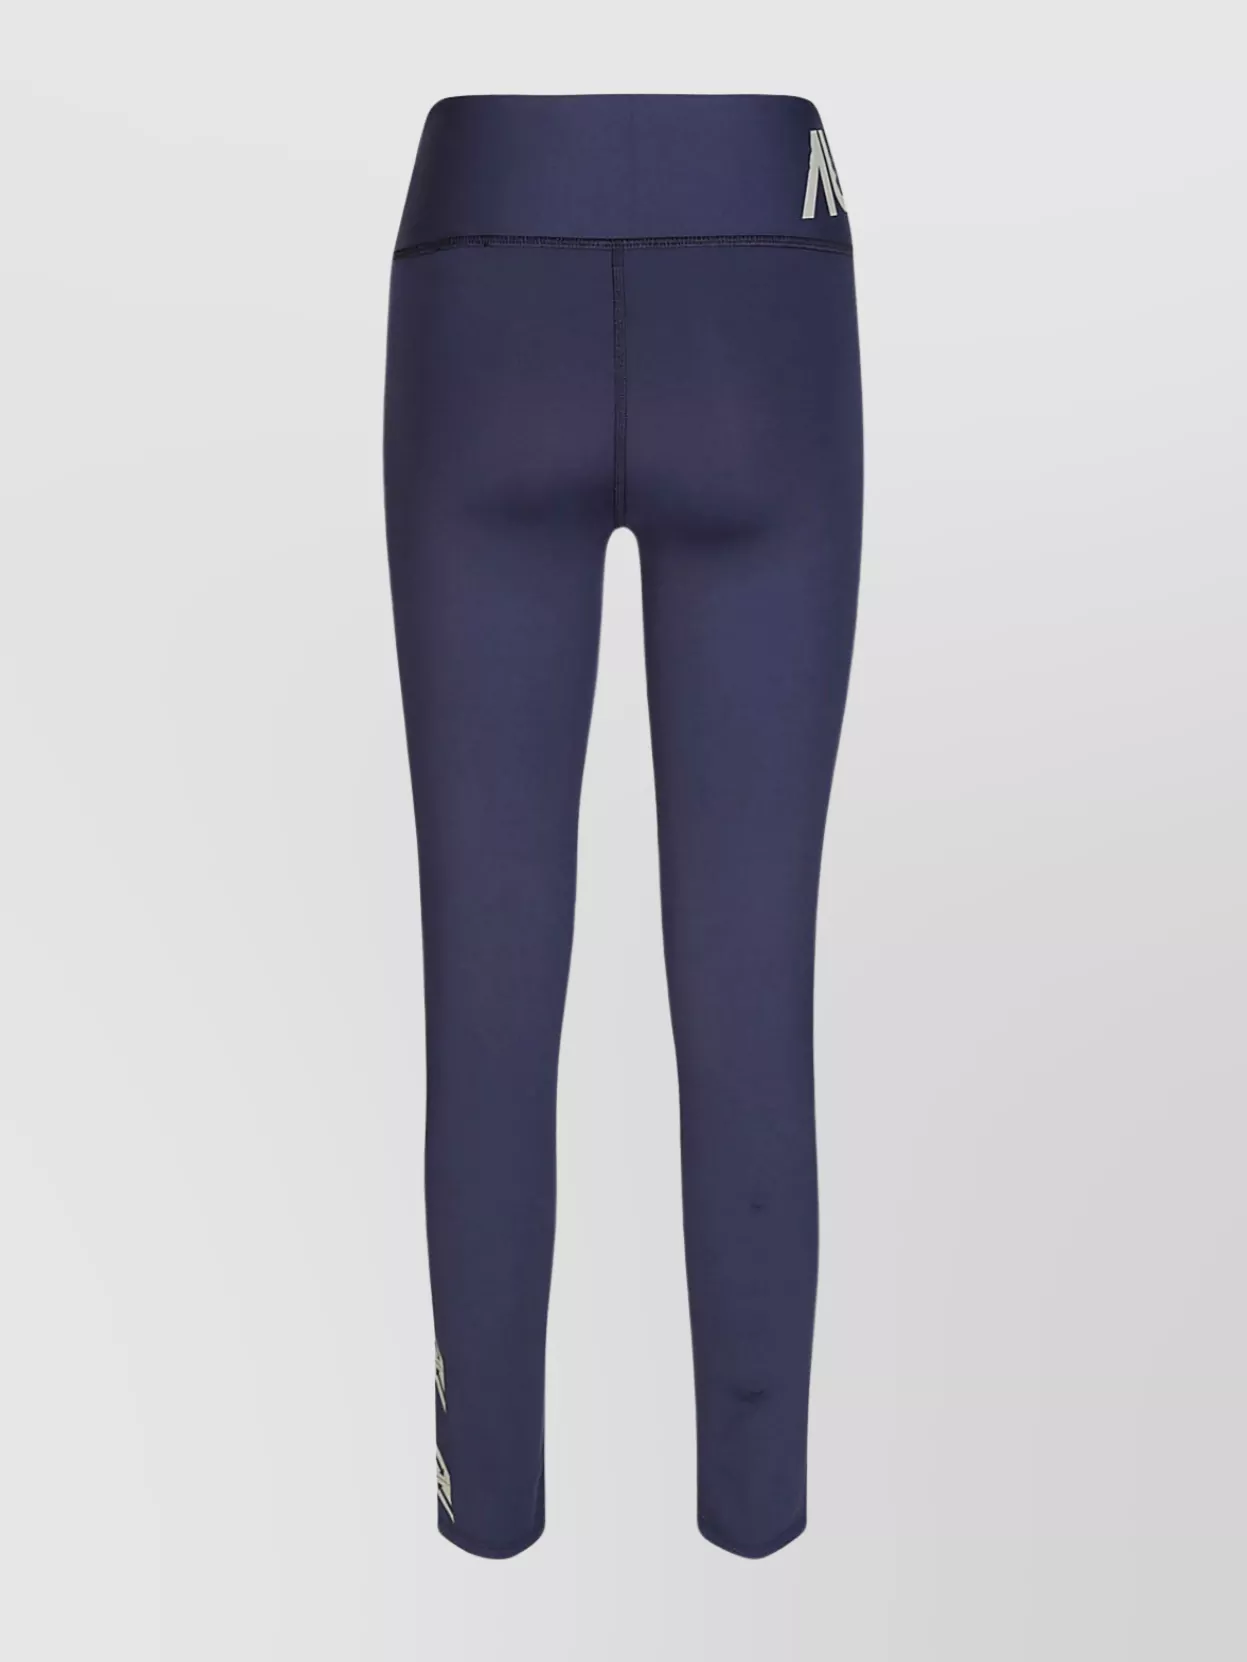 Shop Autry Iconic Leggings Featuring Elasticated Waistband